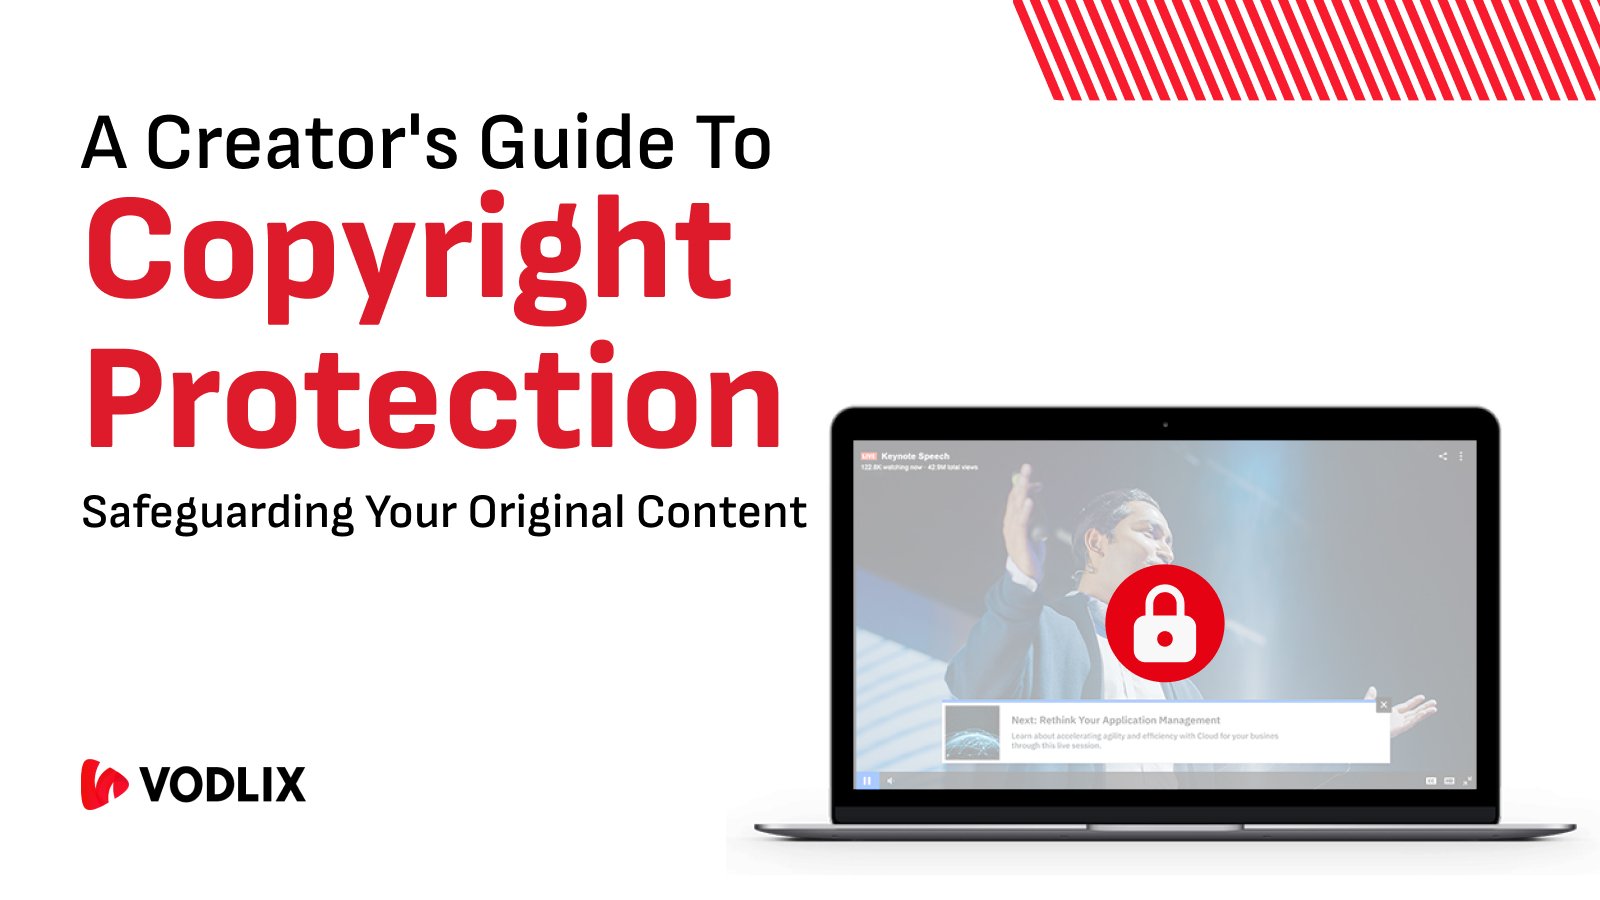 A Creator's Guide to Copyright Protection: Safeguarding Your Original Content